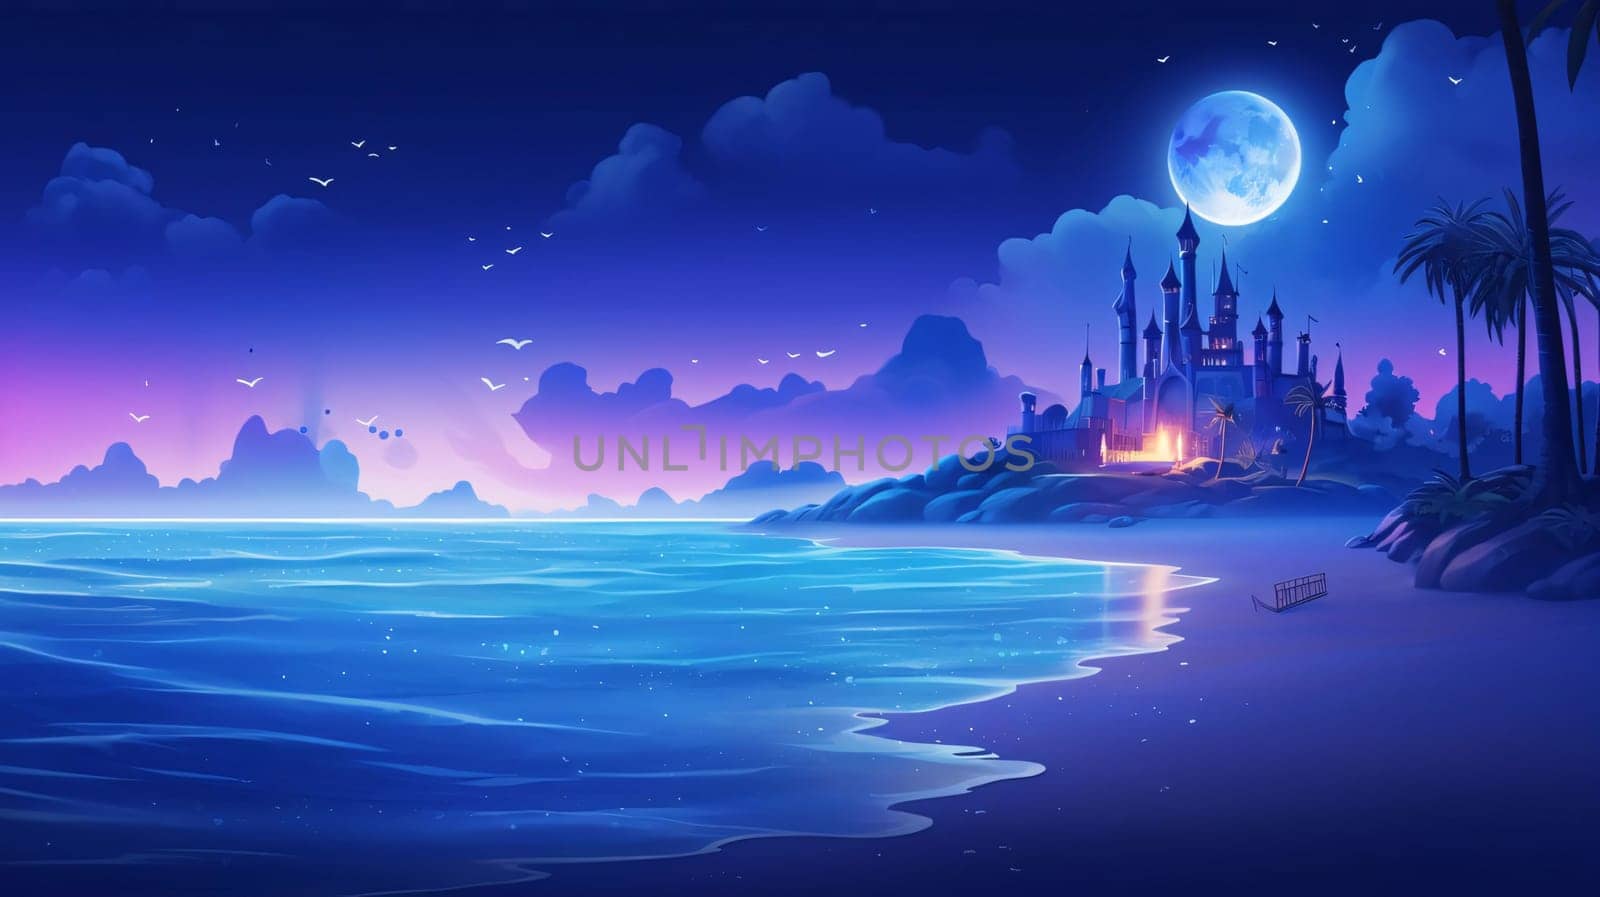 Illustration of a mosque in the middle of the ocean at night by ThemesS